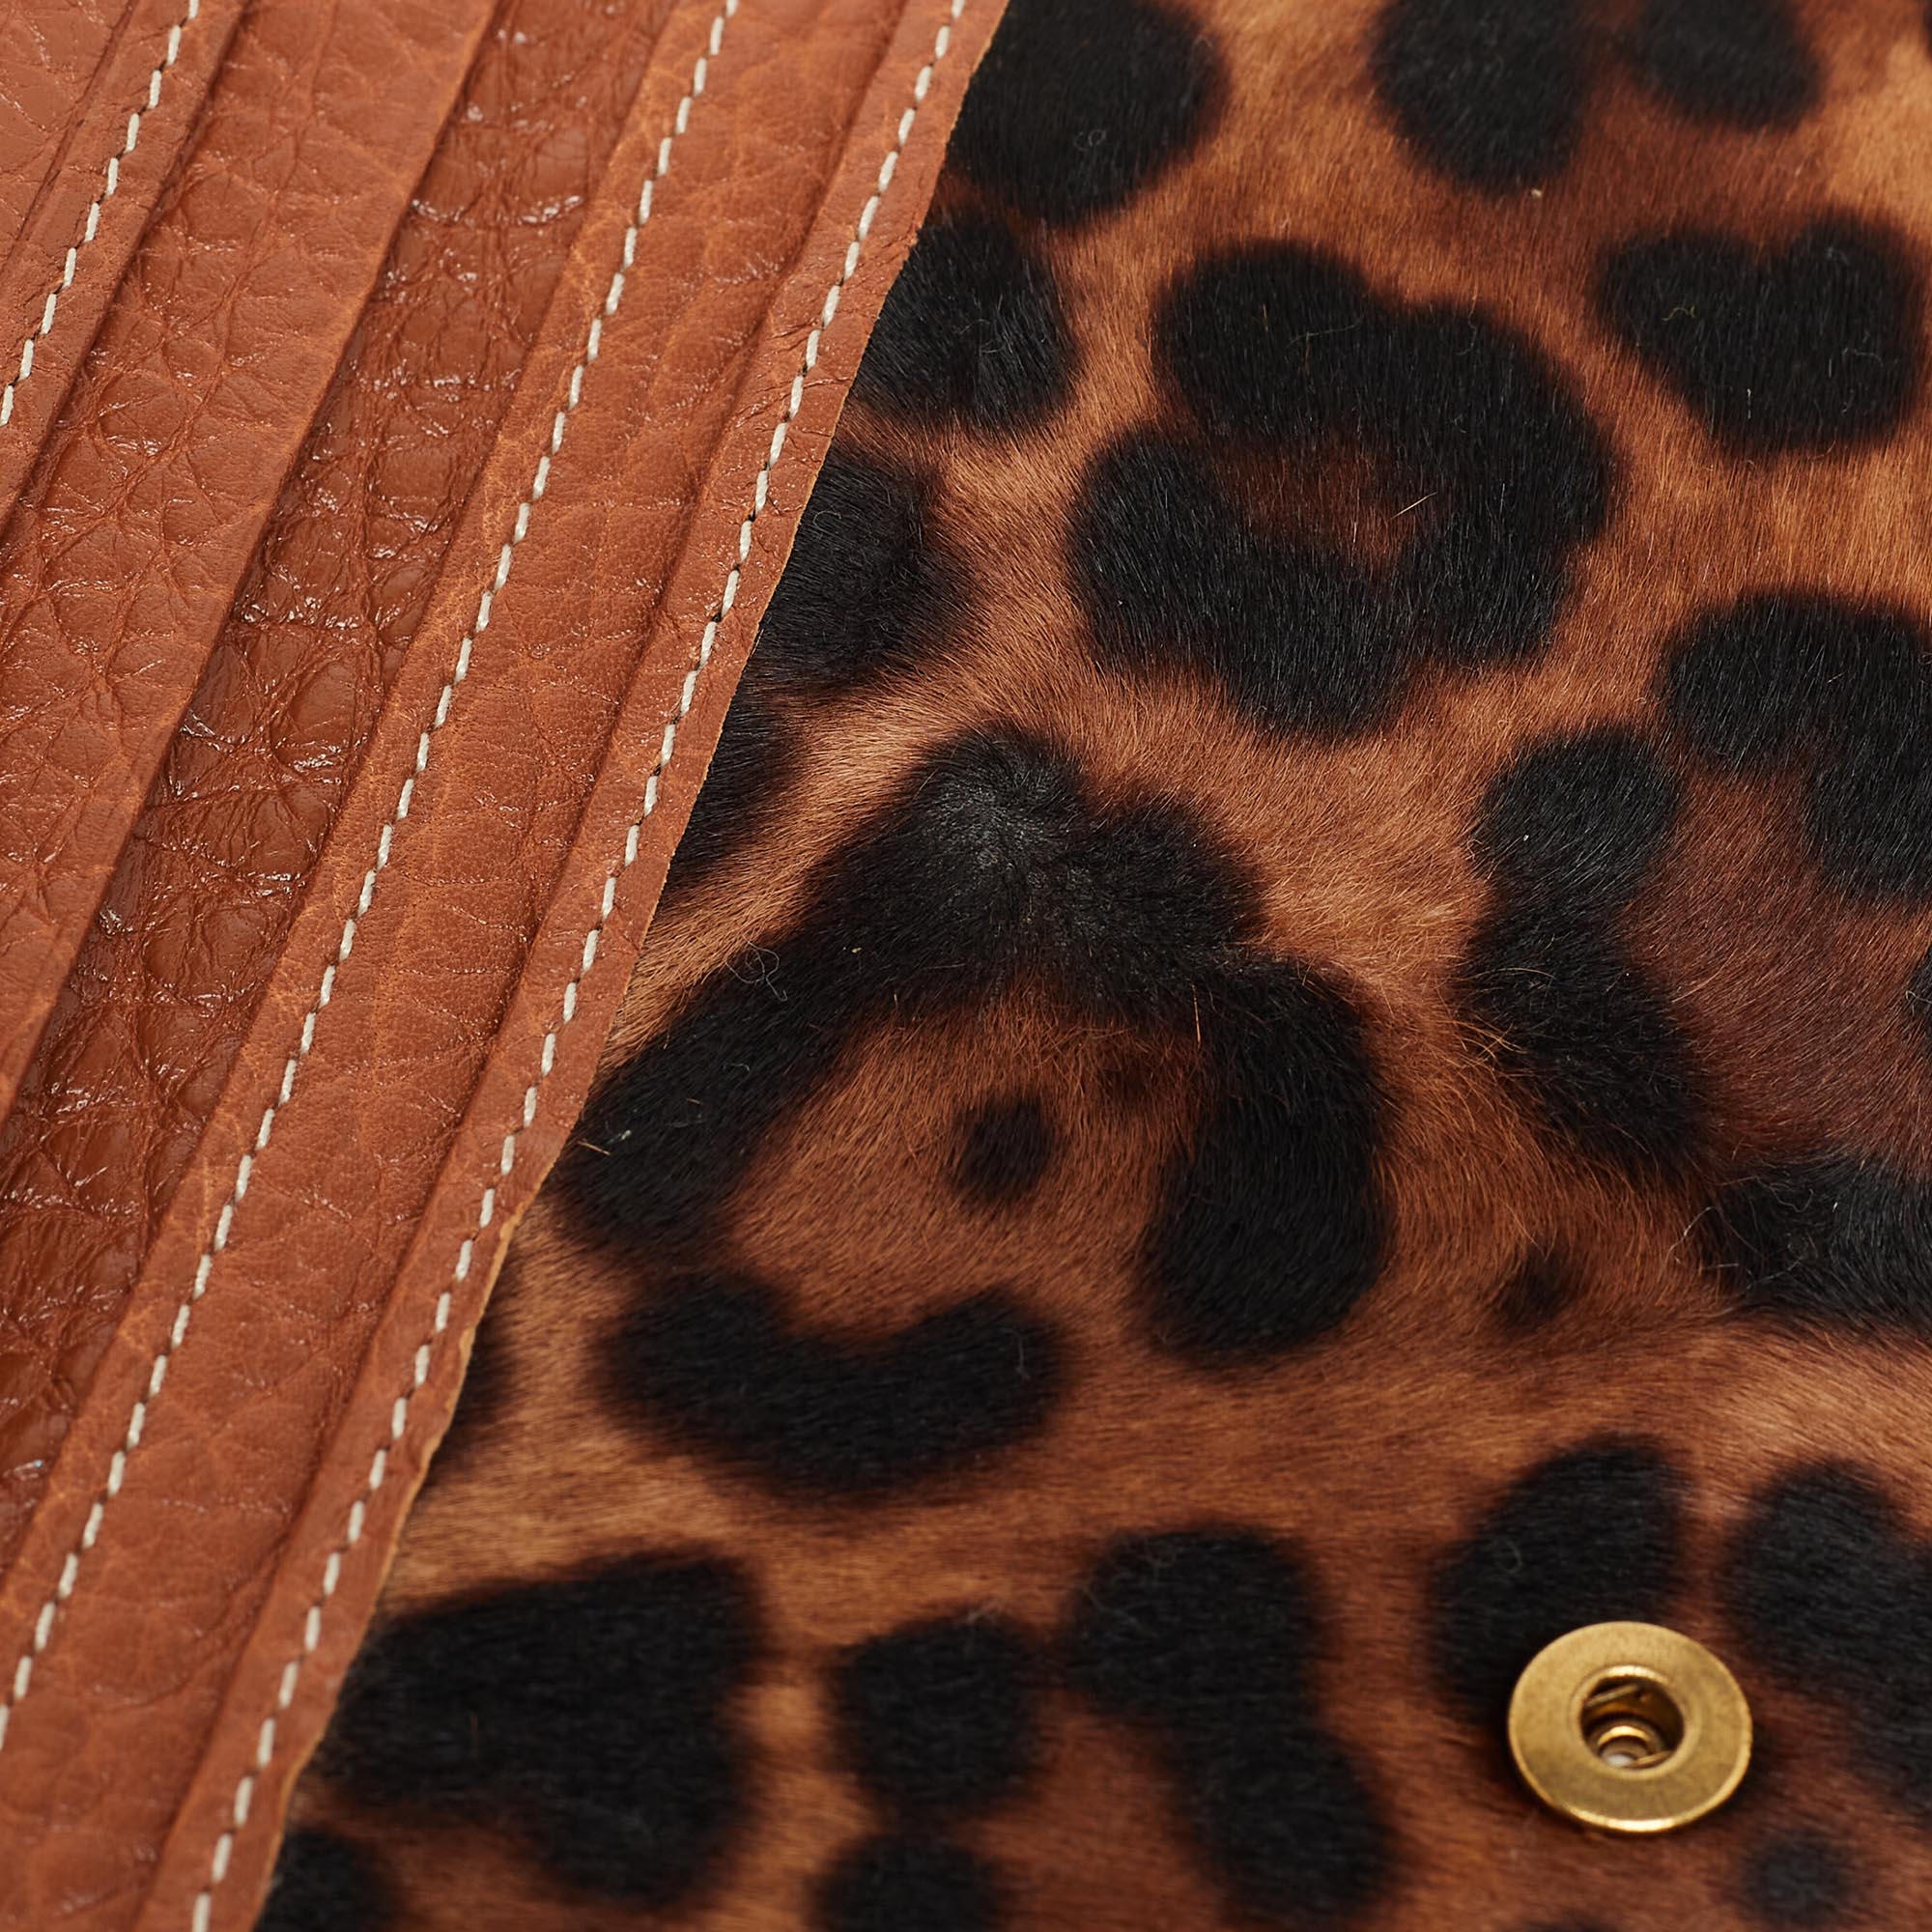 Dolce & Gabbana Brown/Beige Leopard Print Calfhair And Leather Double Flap Continental Wallet